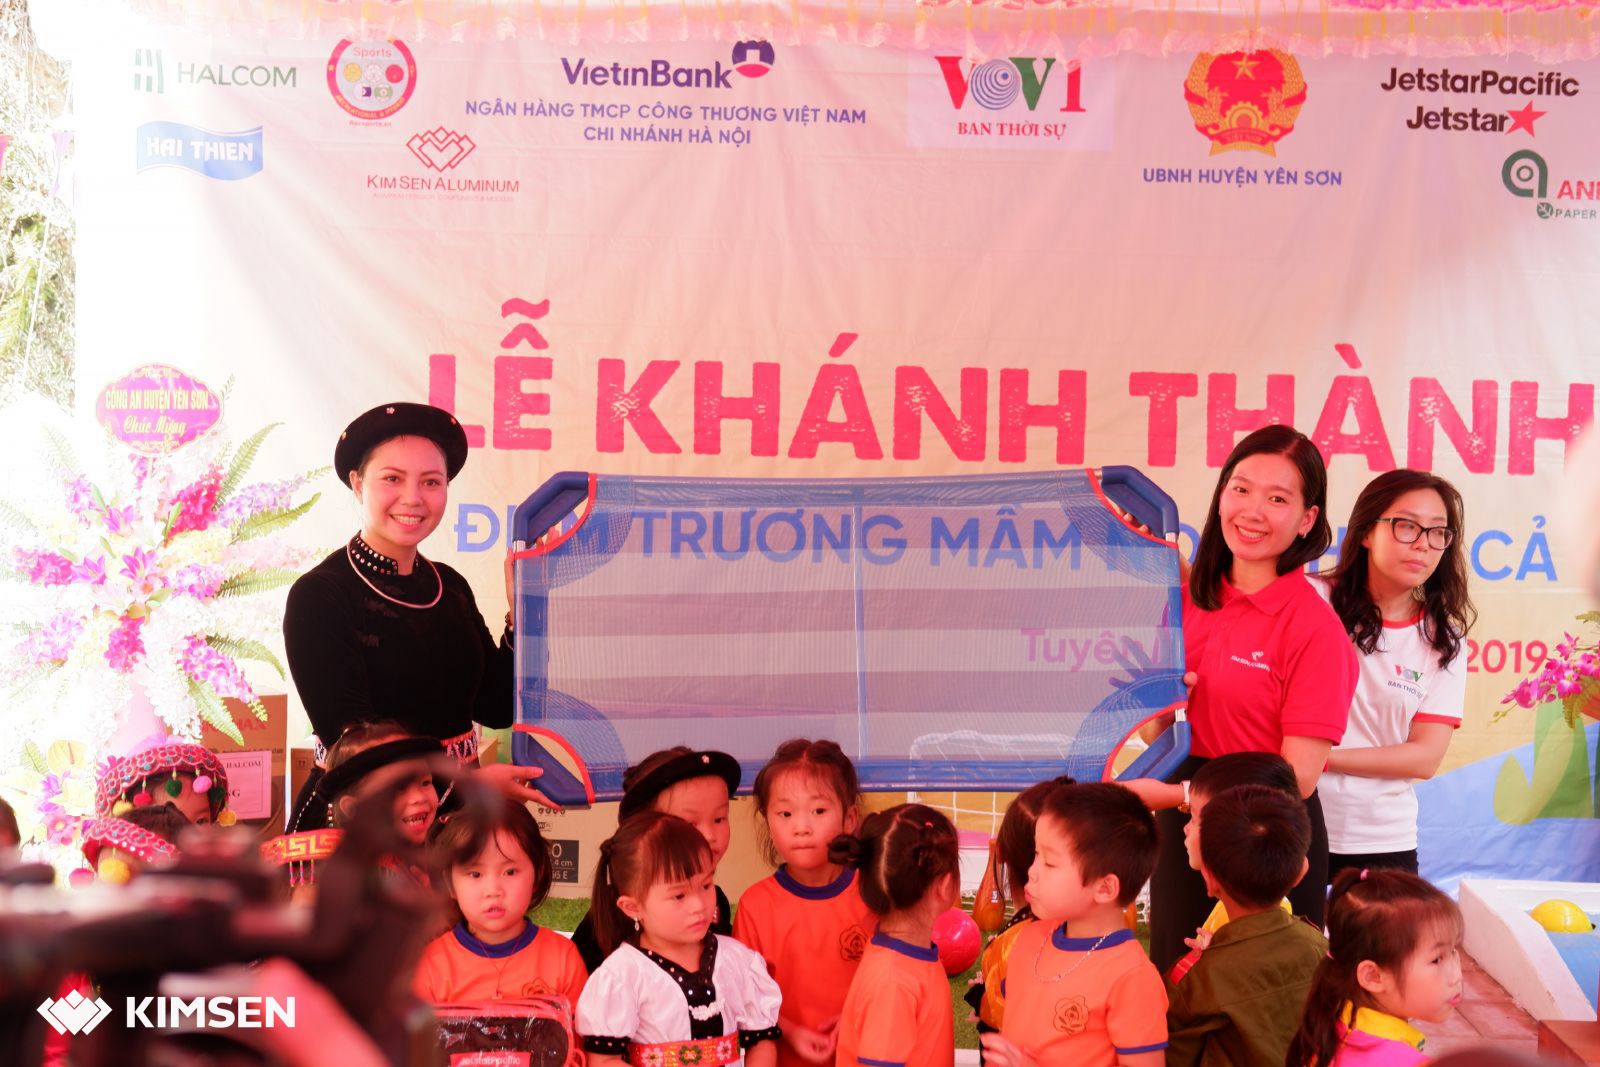 KIMSEN - Joining hands for the community - Opening Ceremony of Thon Ca School, Tuyen Quang Provice